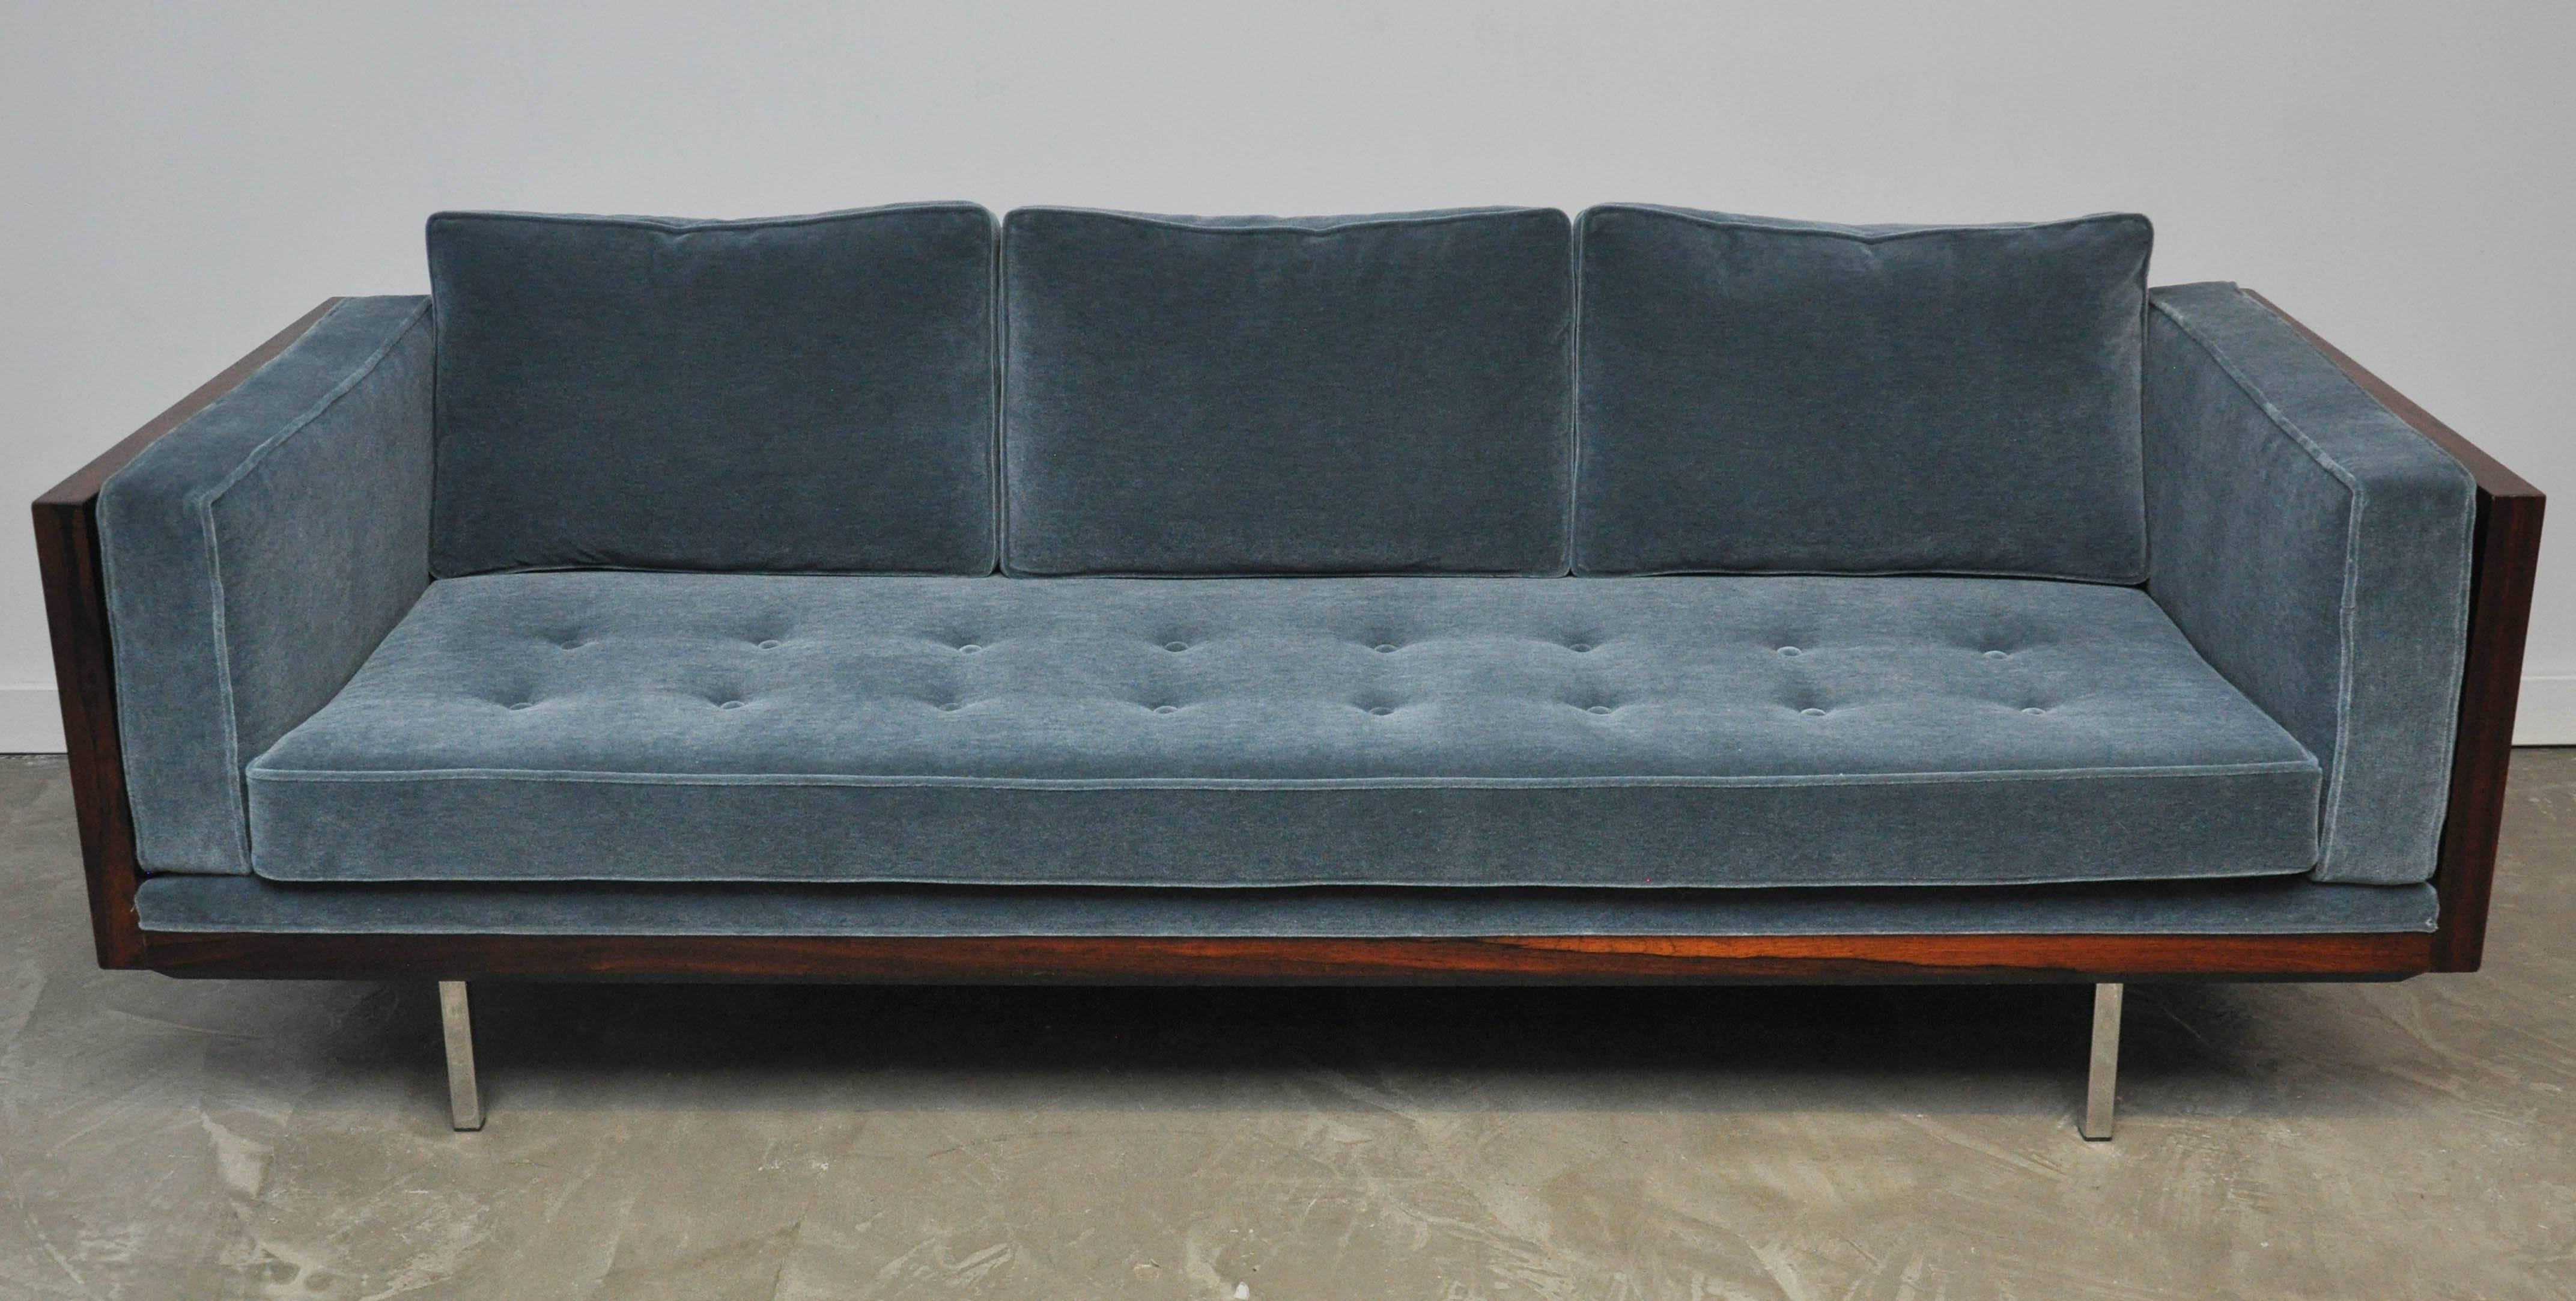 Pair of rosewood case sofas by Milo Baughman. Beautiful rosewood grain. Fully restored cases. Reupholstered in mohair.